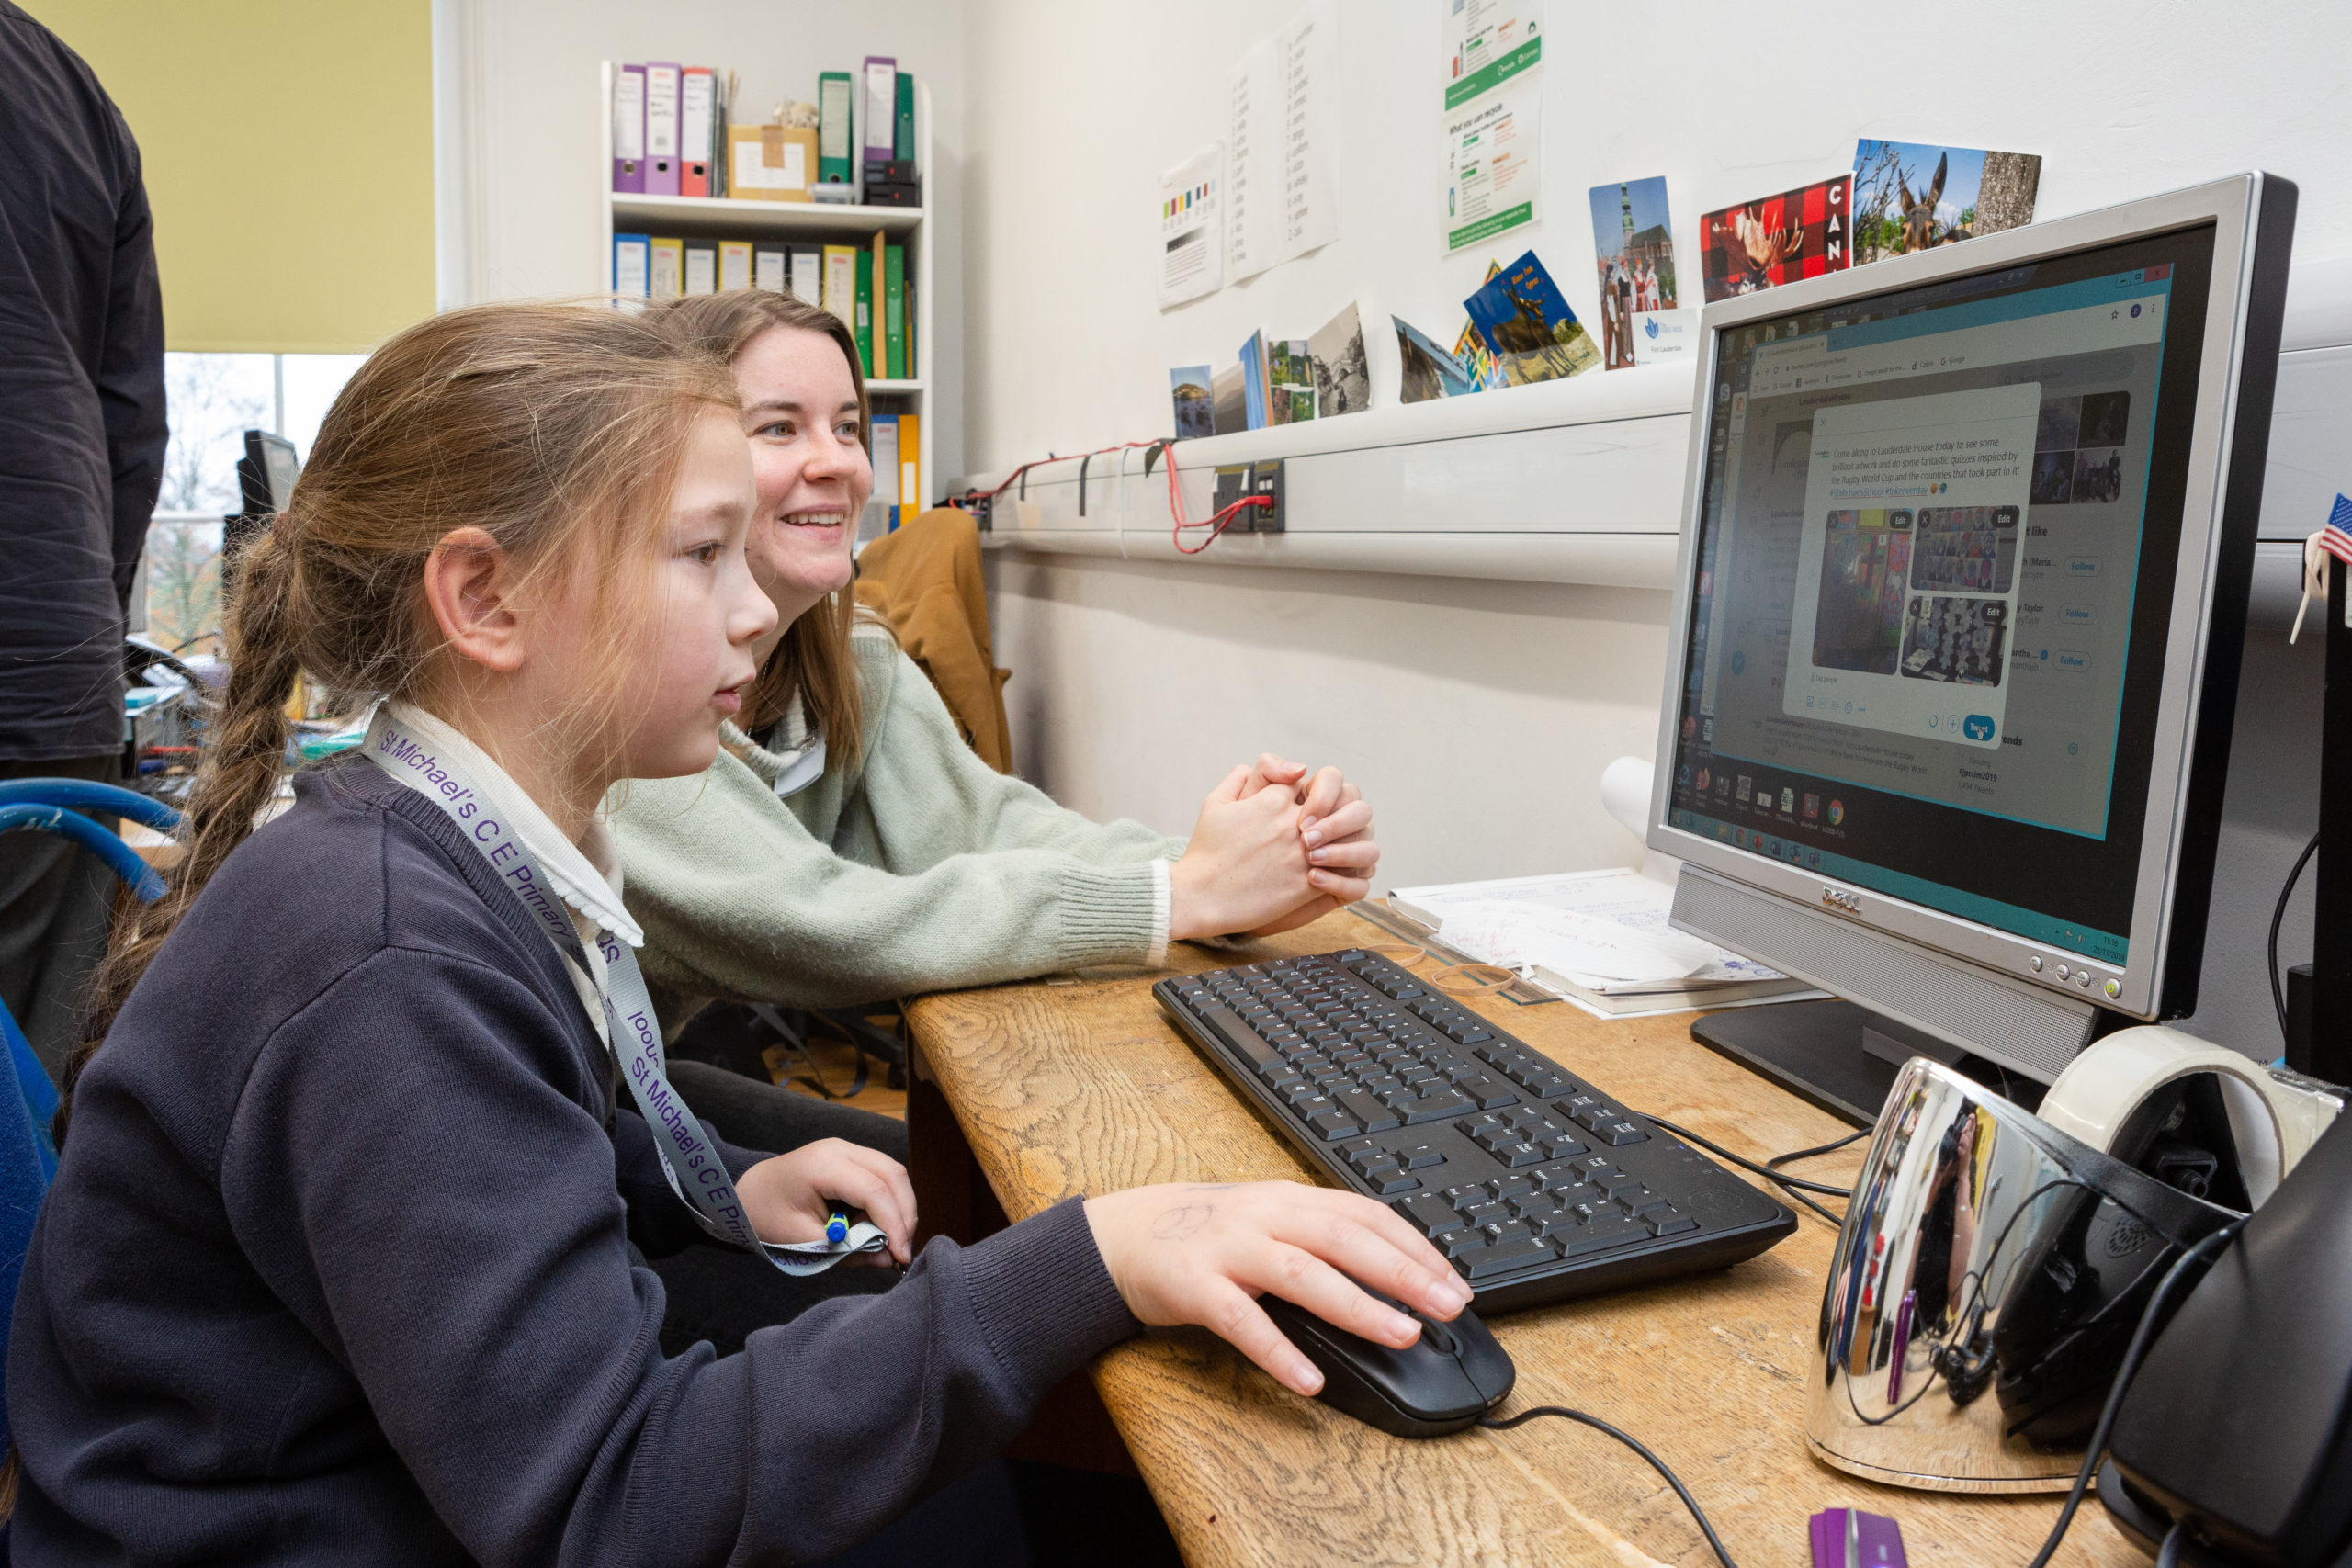 A young girl plays at a computer supervised by an adult sitting next to her in an office at Lauderdale House.